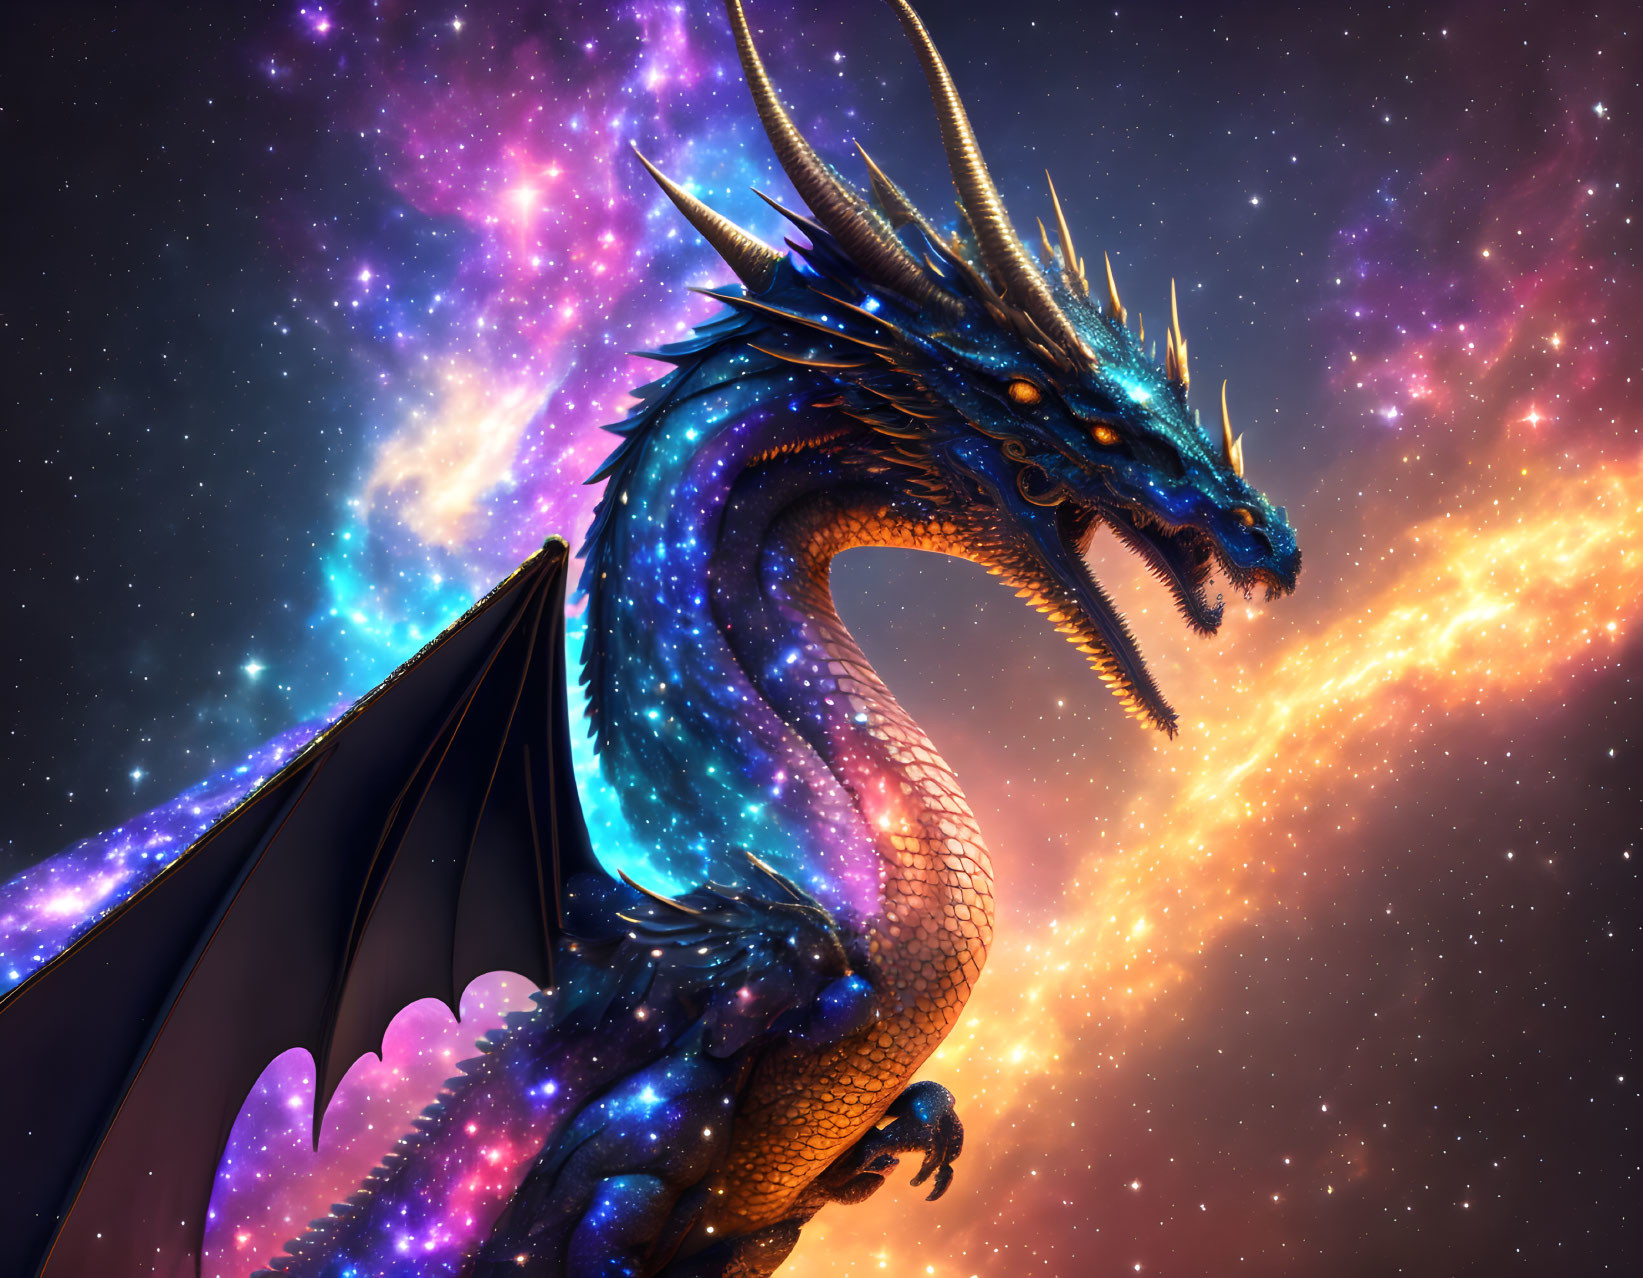 Majestic blue dragon with large wings in cosmic setting